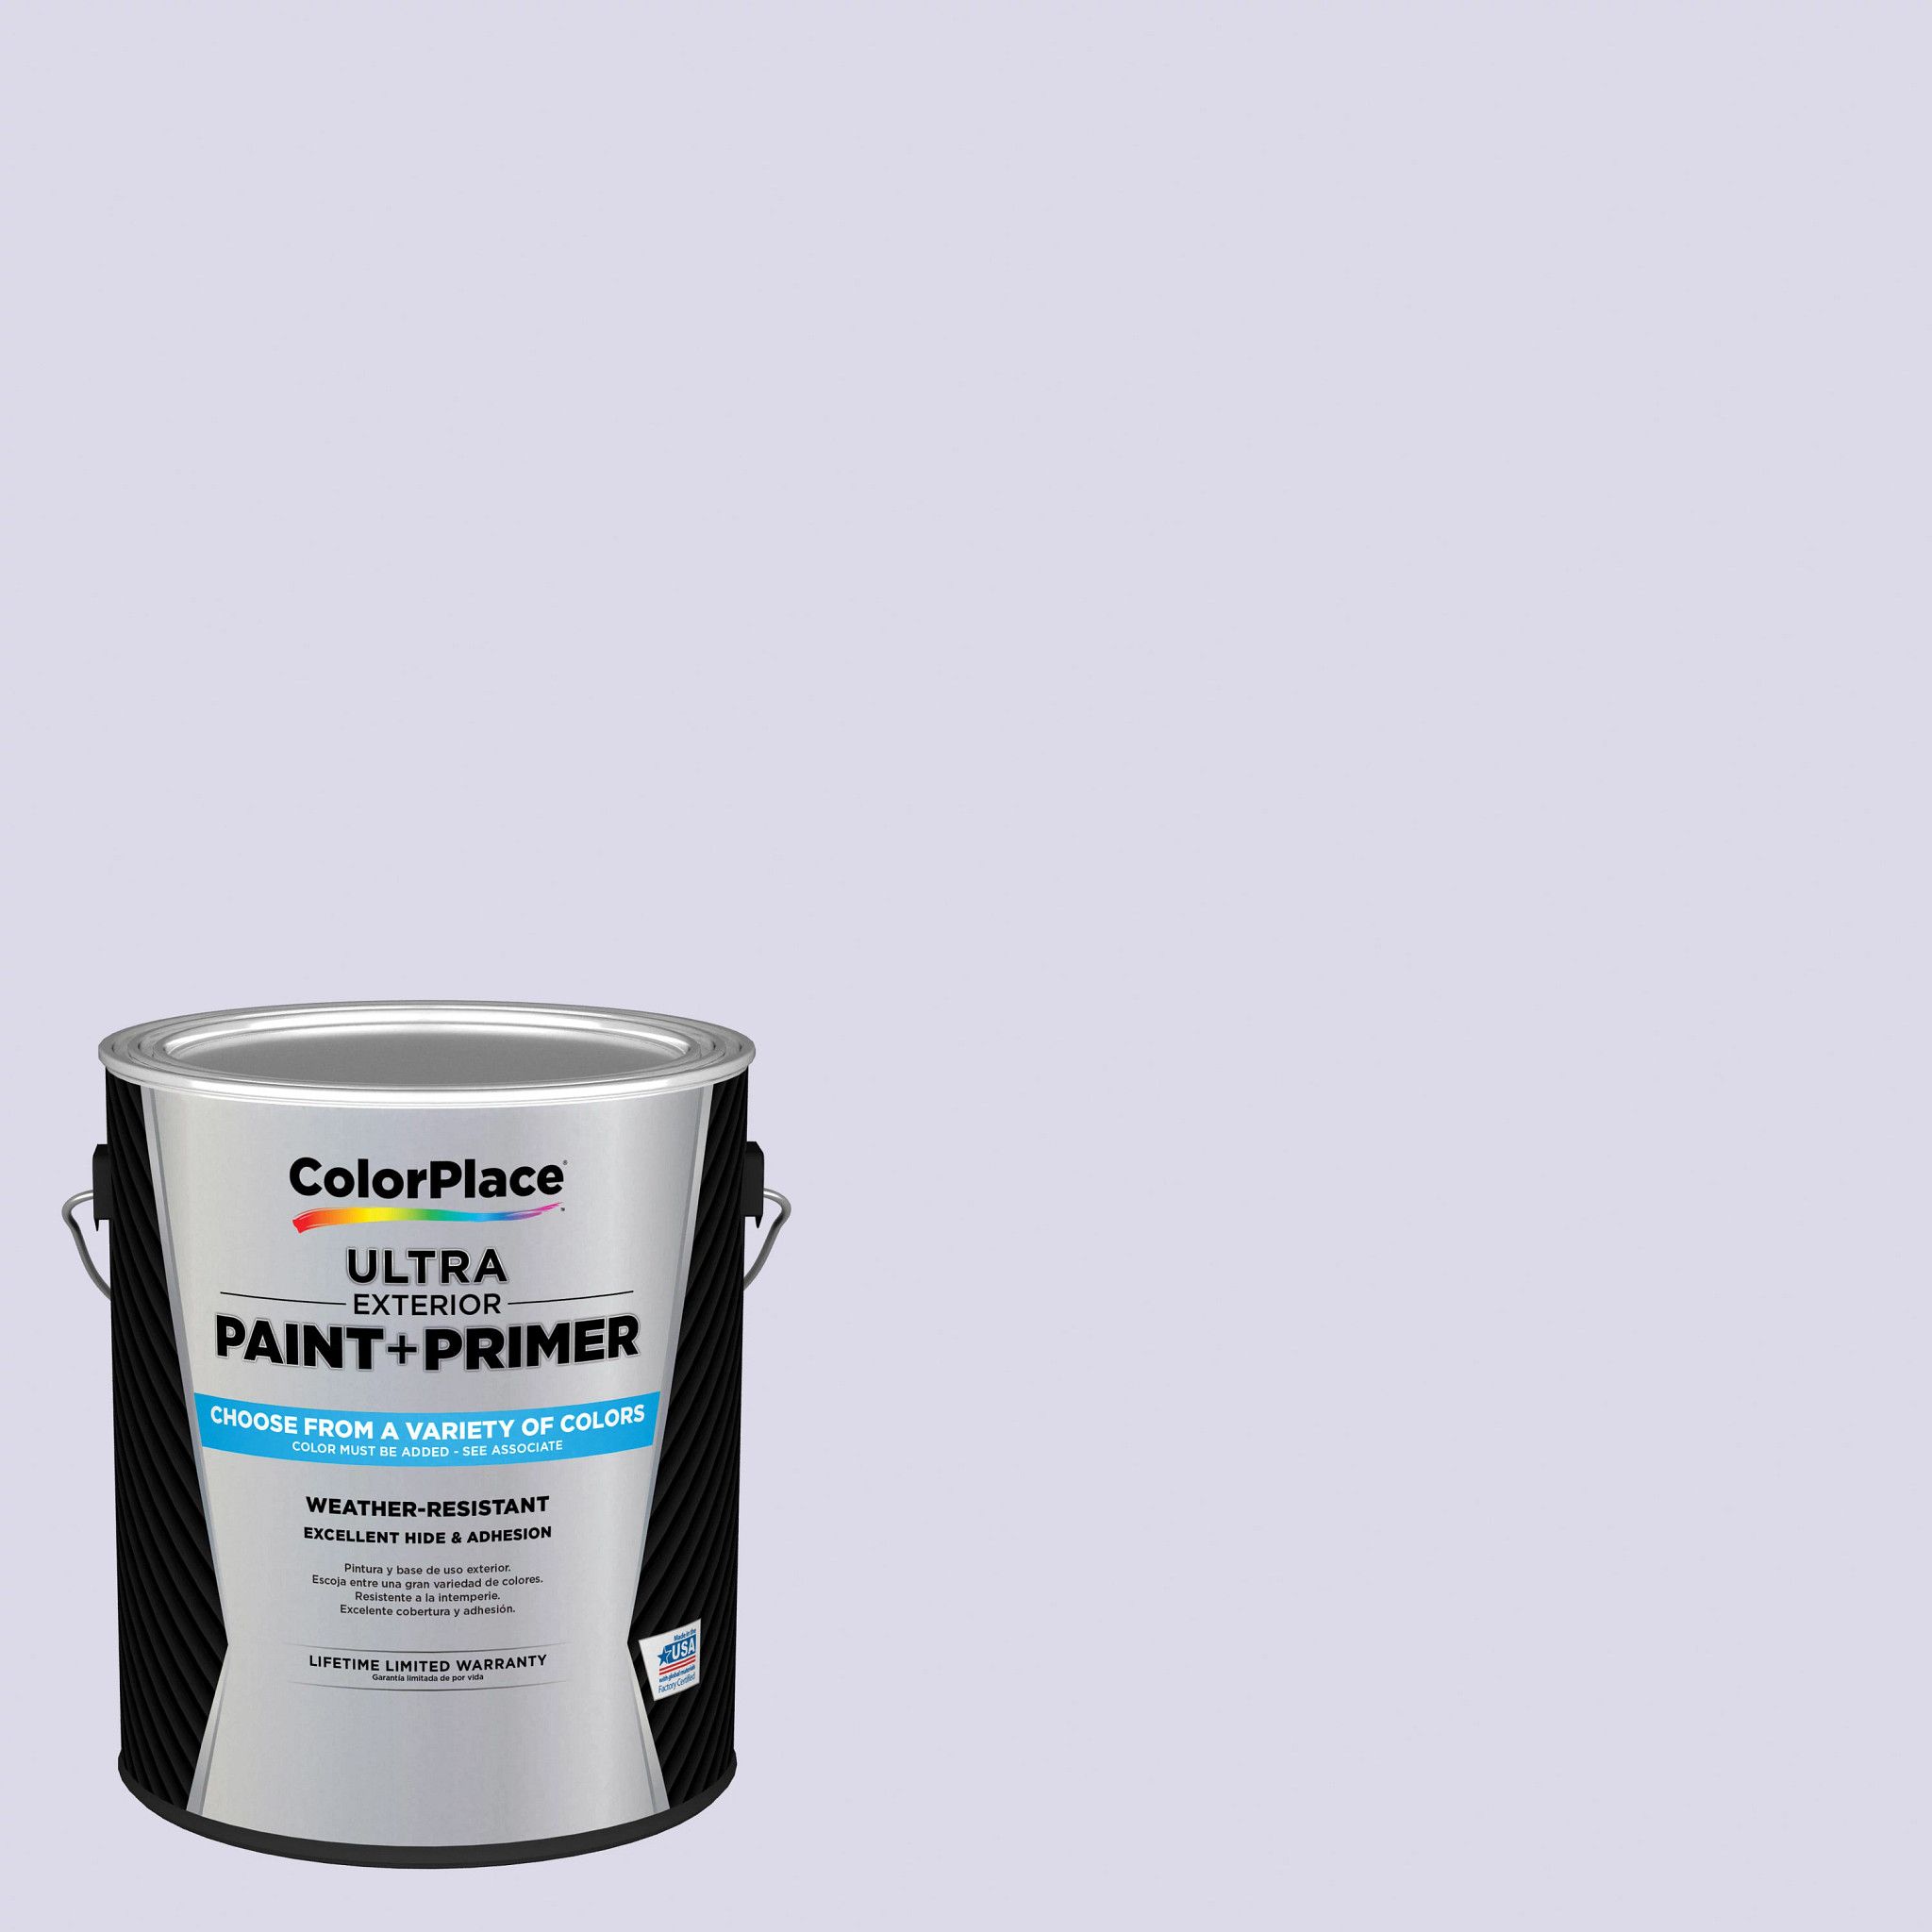 ColorPlace Ultra Exterior Paint & Primer, Amethyst Ice, Flat, 1 Gallon - image 1 of 11